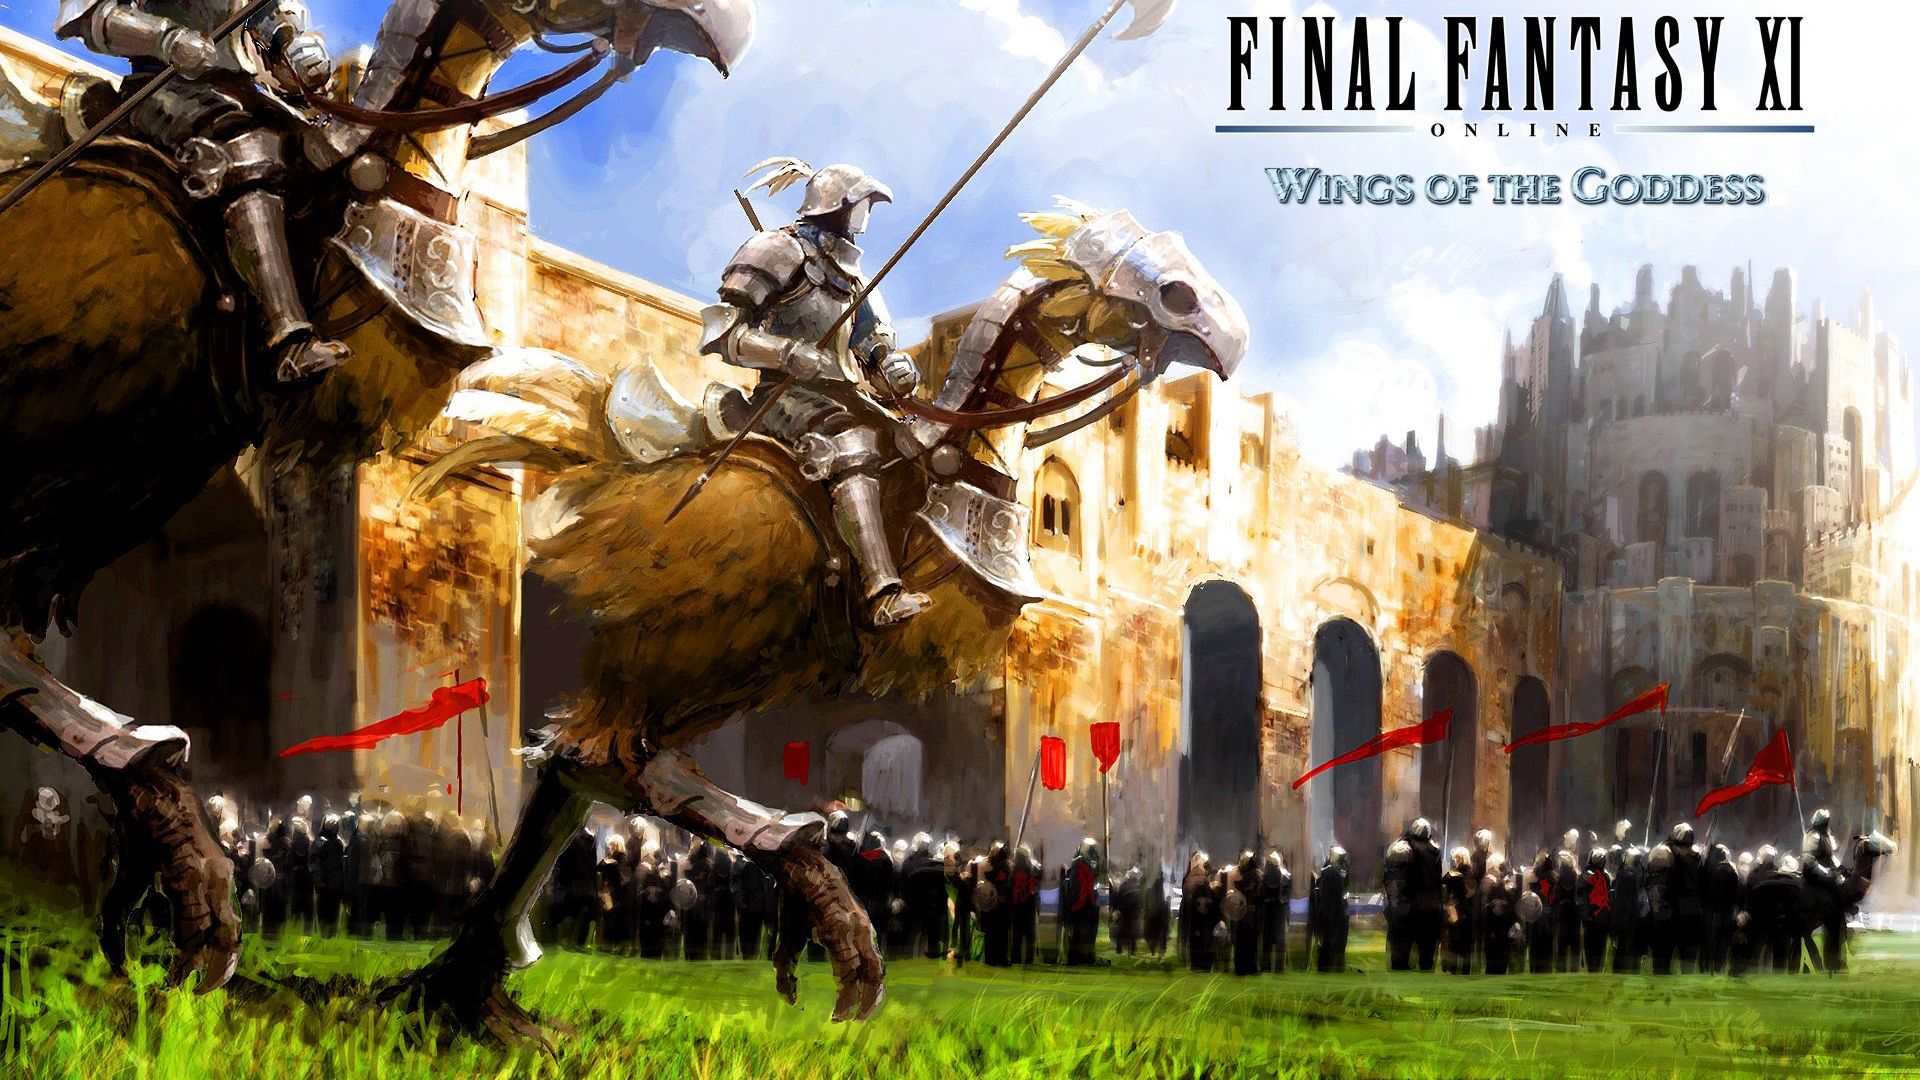 Free download Image Library Amazing Final Fantasy XI Wallpaper [1920x1200] for your Desktop, Mobile & Tablet. Explore FFXI Wallpaper HD. Final Fantasy 13 Wallpaper Hd, Final Fantasy 7 Wallpaper, Final Fantasy 10 Wallpaper